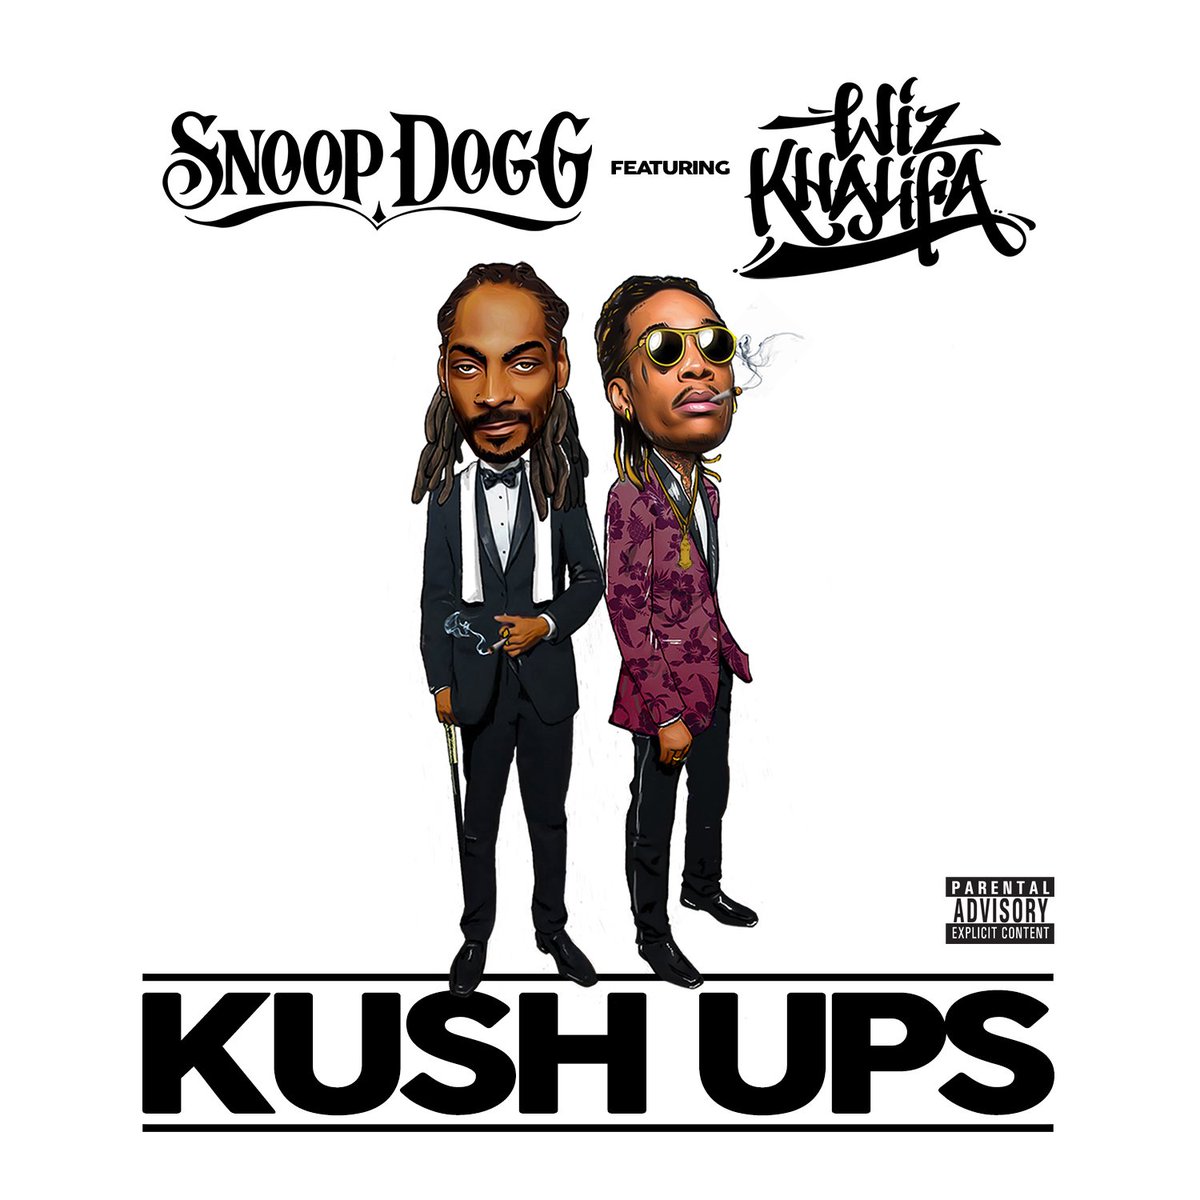 New single #KUSHUPS feat. @WizKhalifa out now on @iTunes !! https://t.co/DUuePe1VyU
 #COOLAID comn soon. https://t.co/a1Gv570ZBp